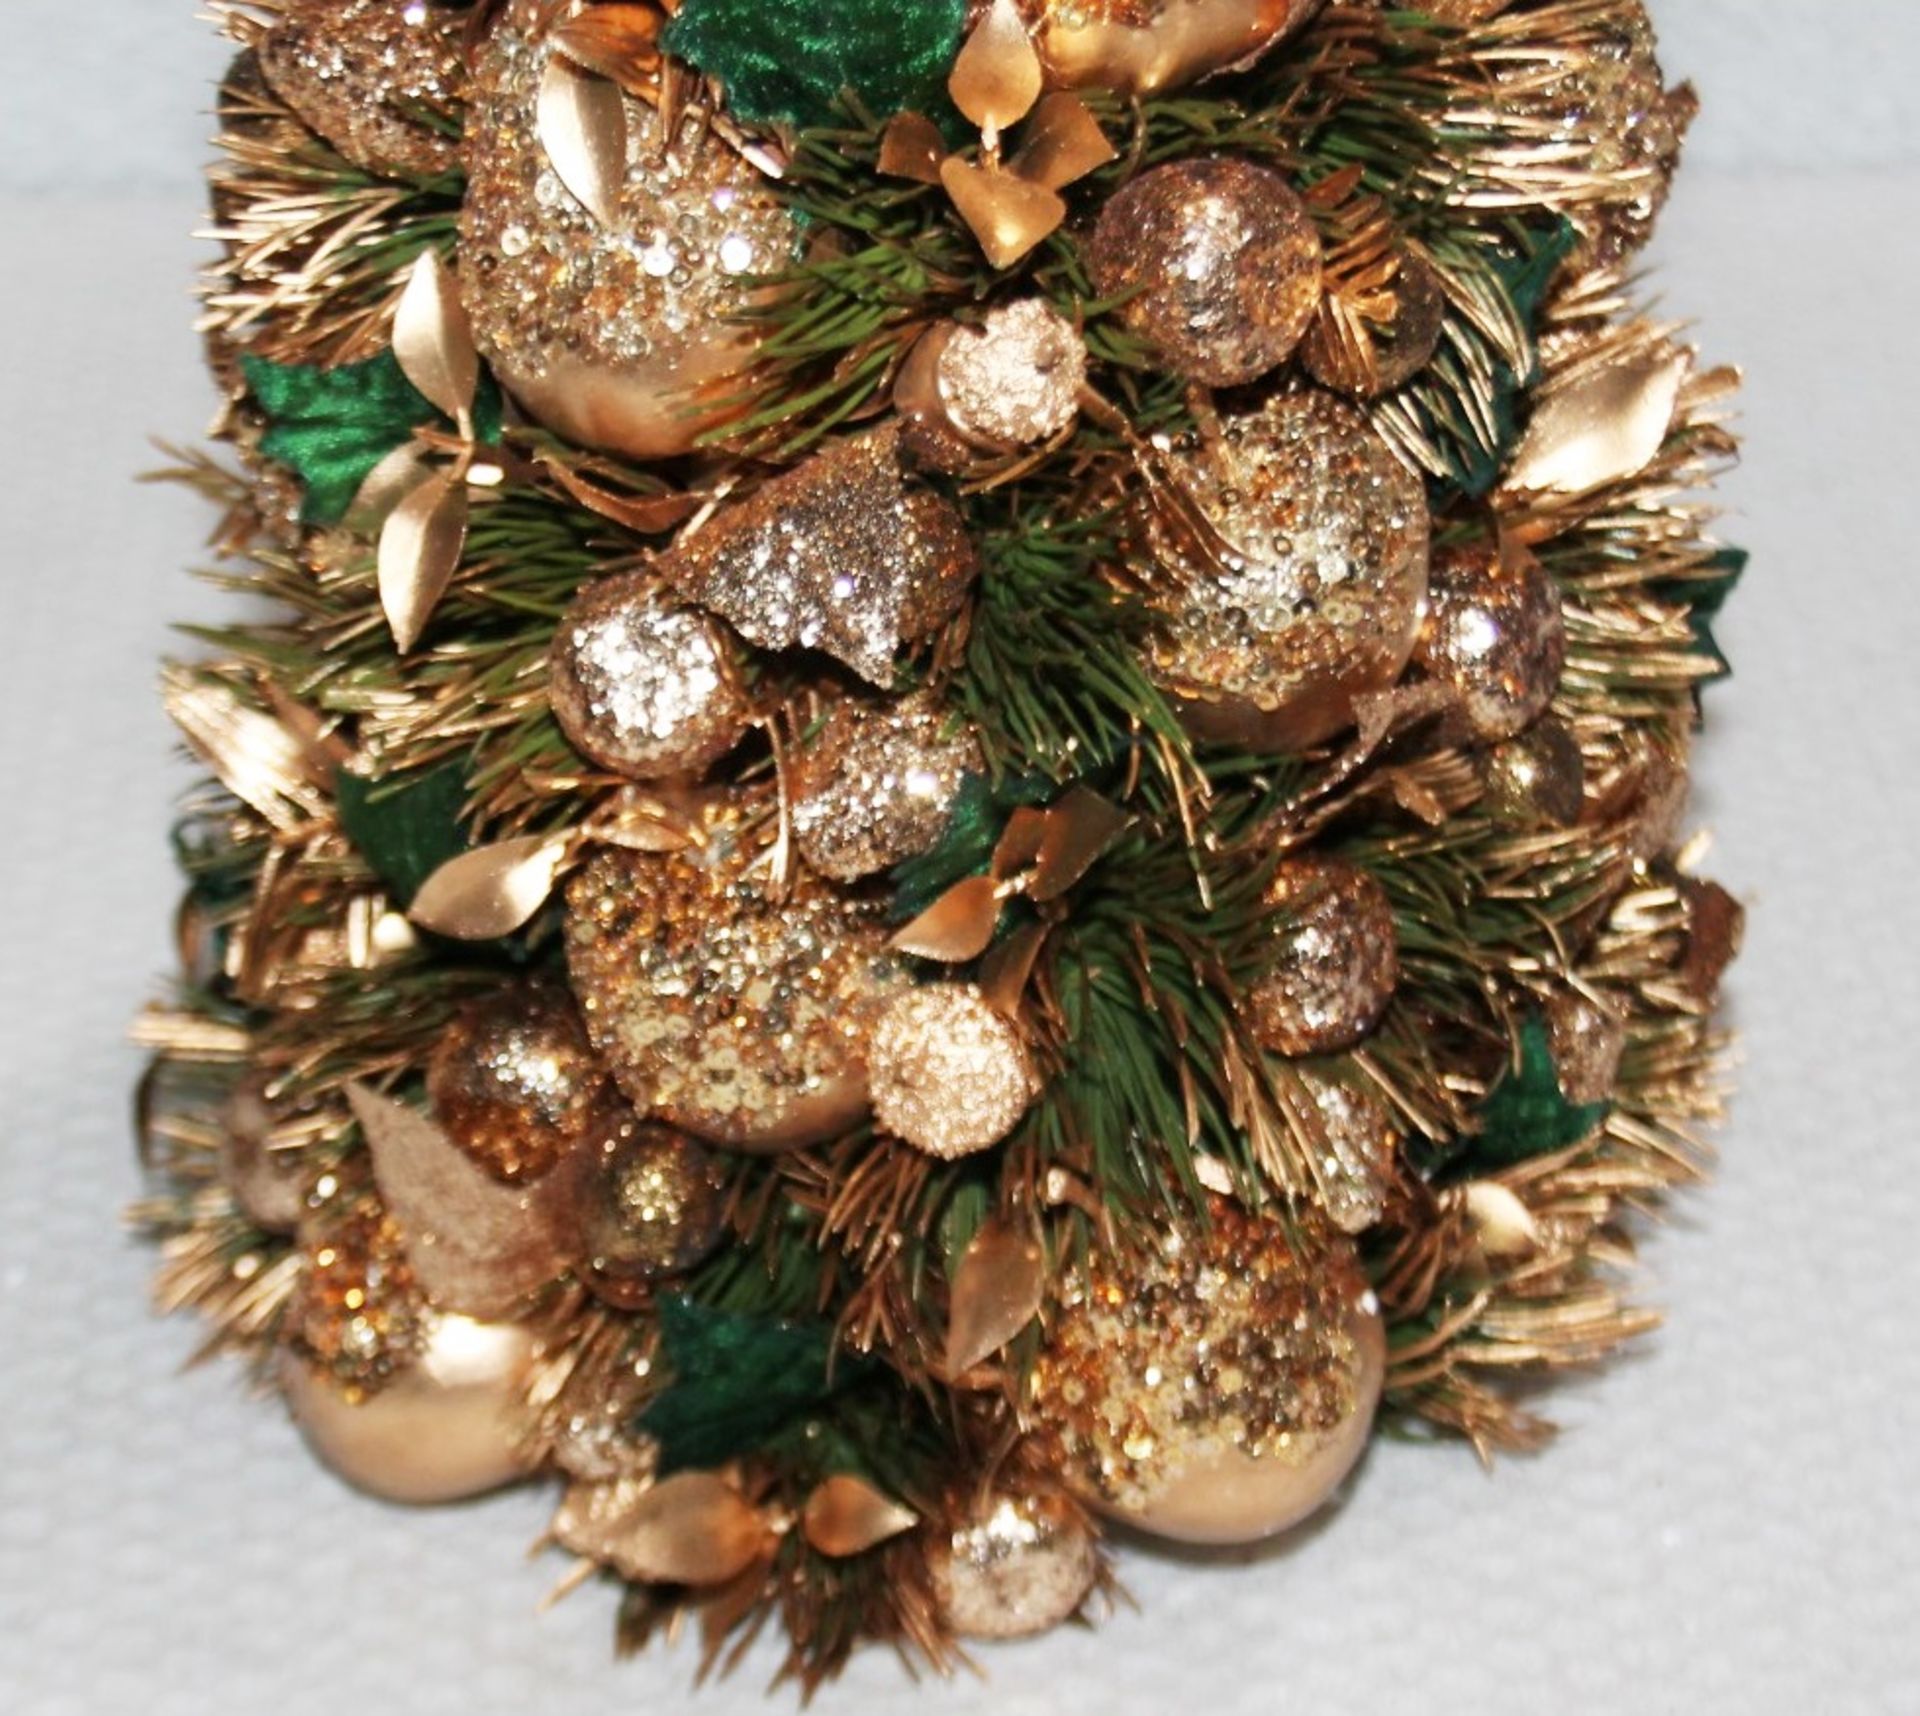 1 x SALZBURG CREATIONS Decorative 'Pear Tree' Ornament In Gold & Green - Original Price £300.00 - Image 2 of 9